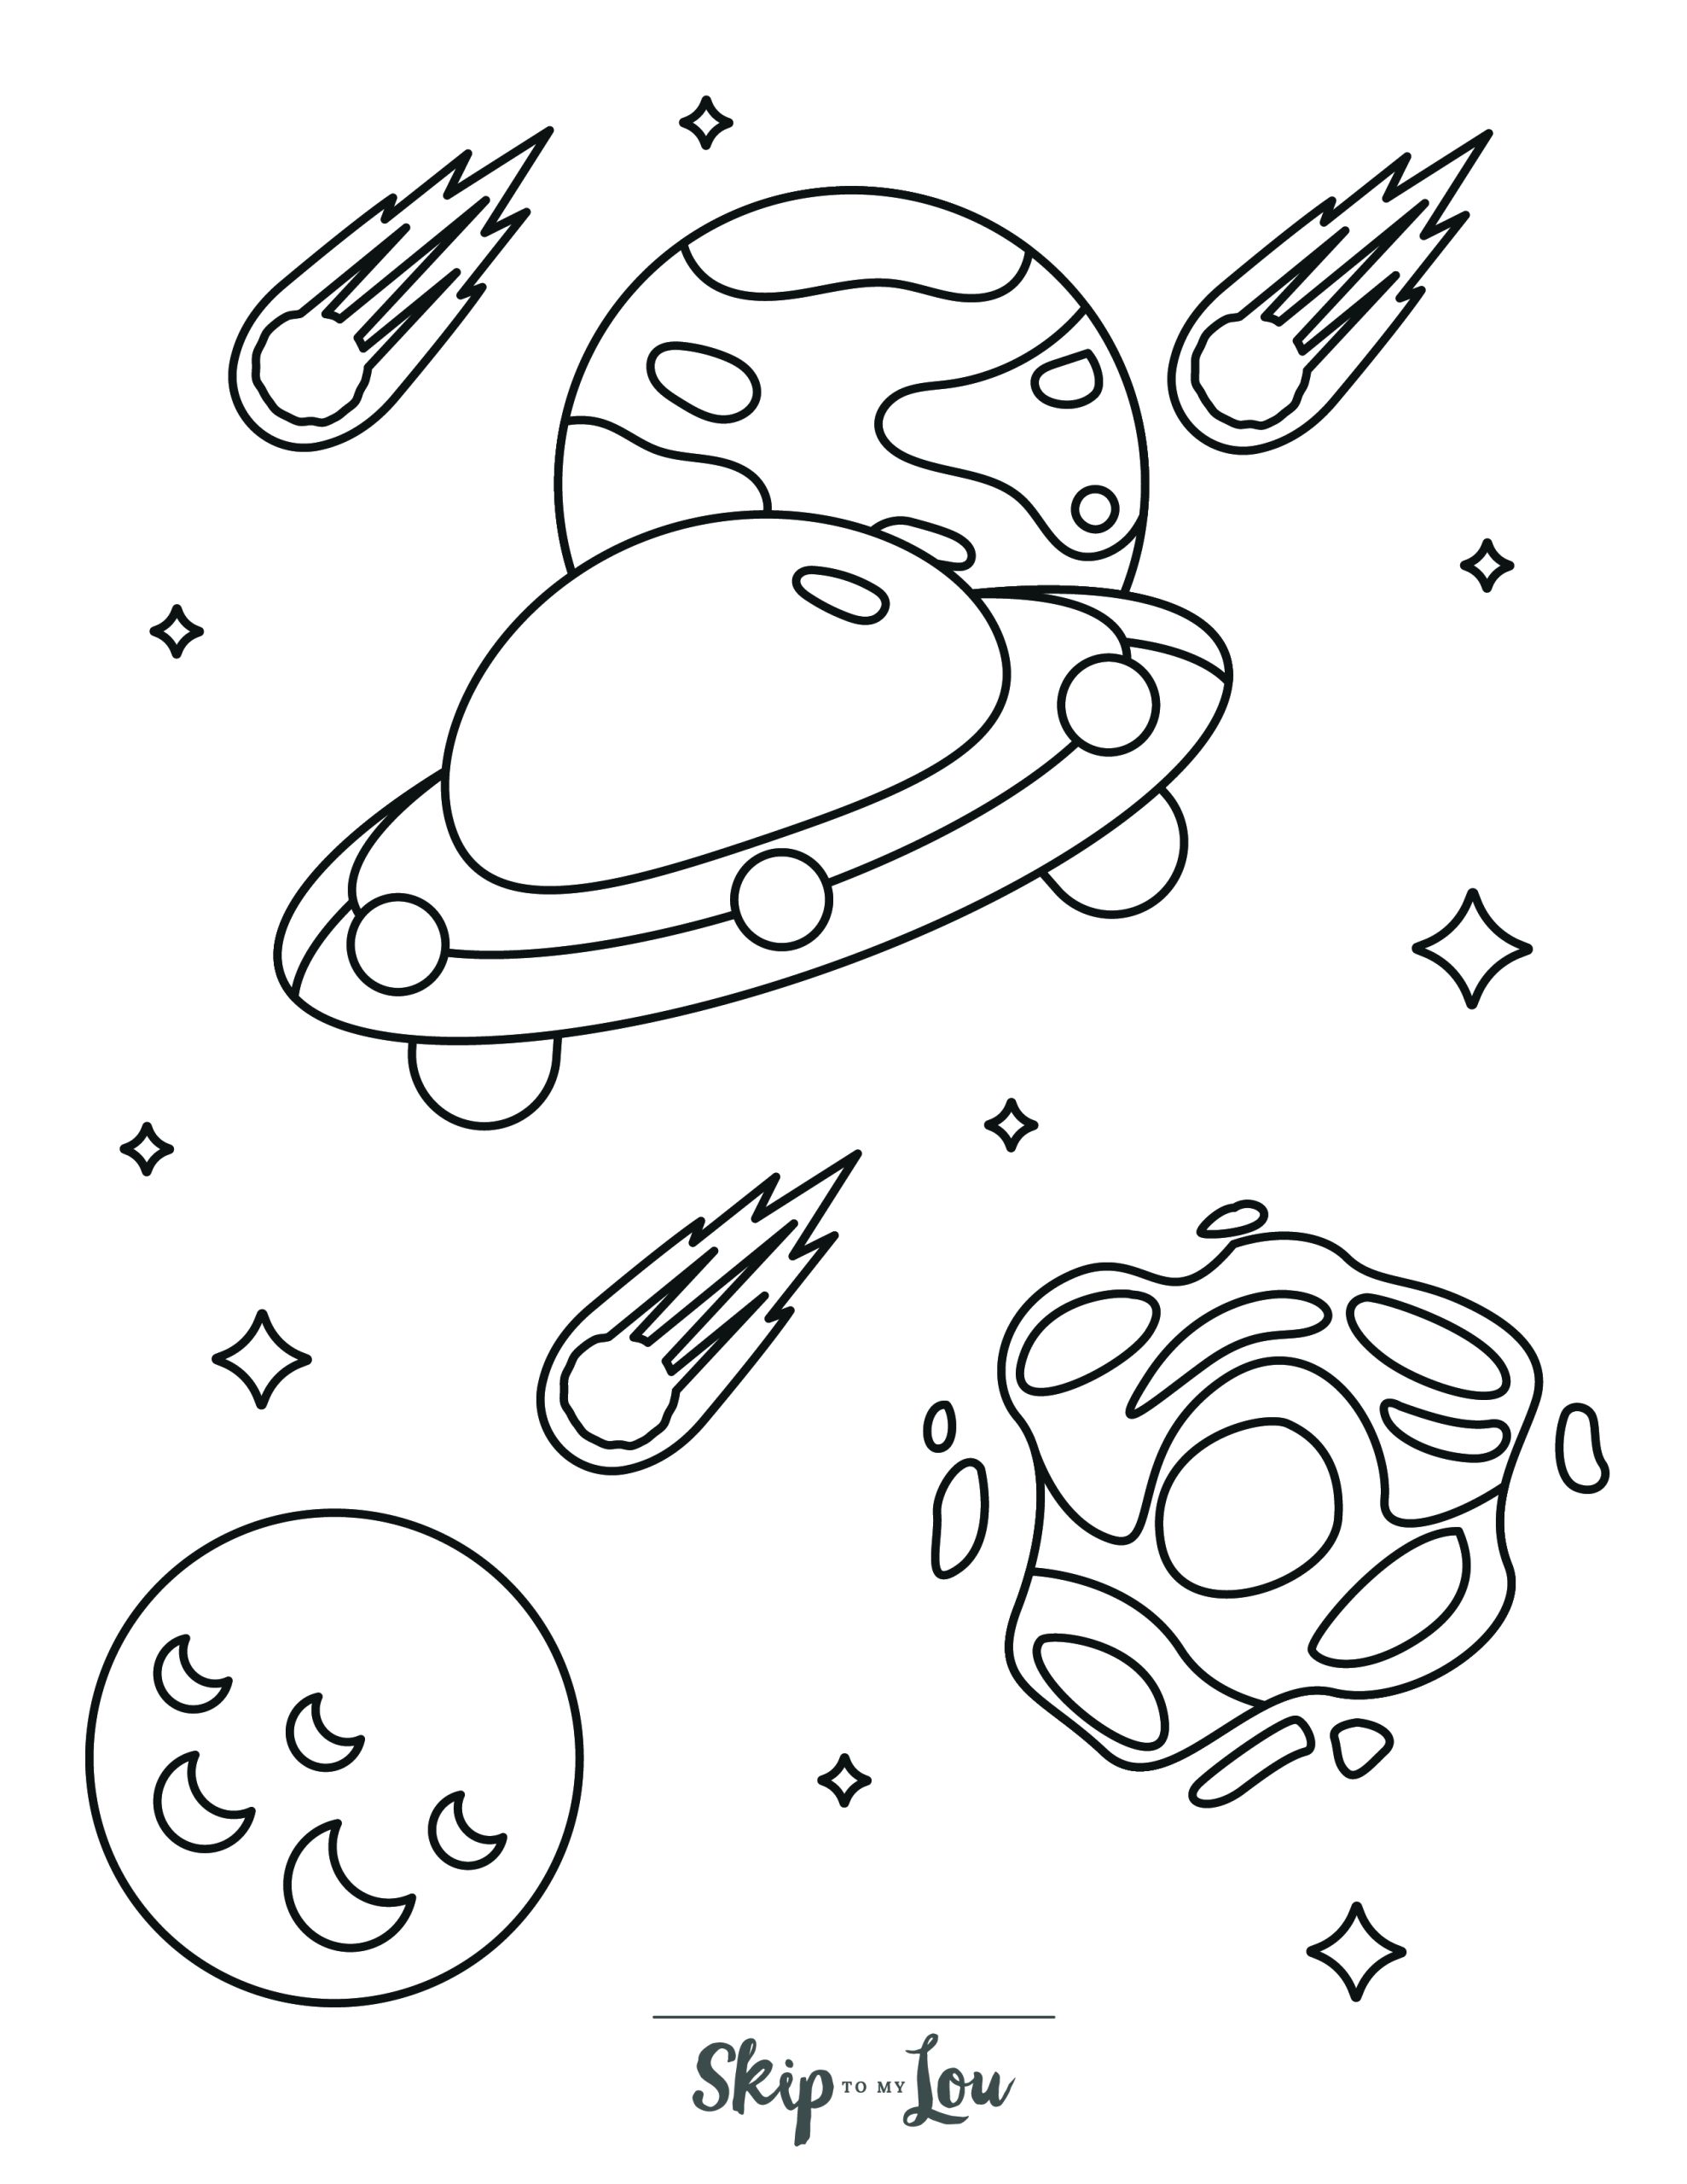 Space Coloring Page 6 - Space scene with spaceship, planets, and shooting stars